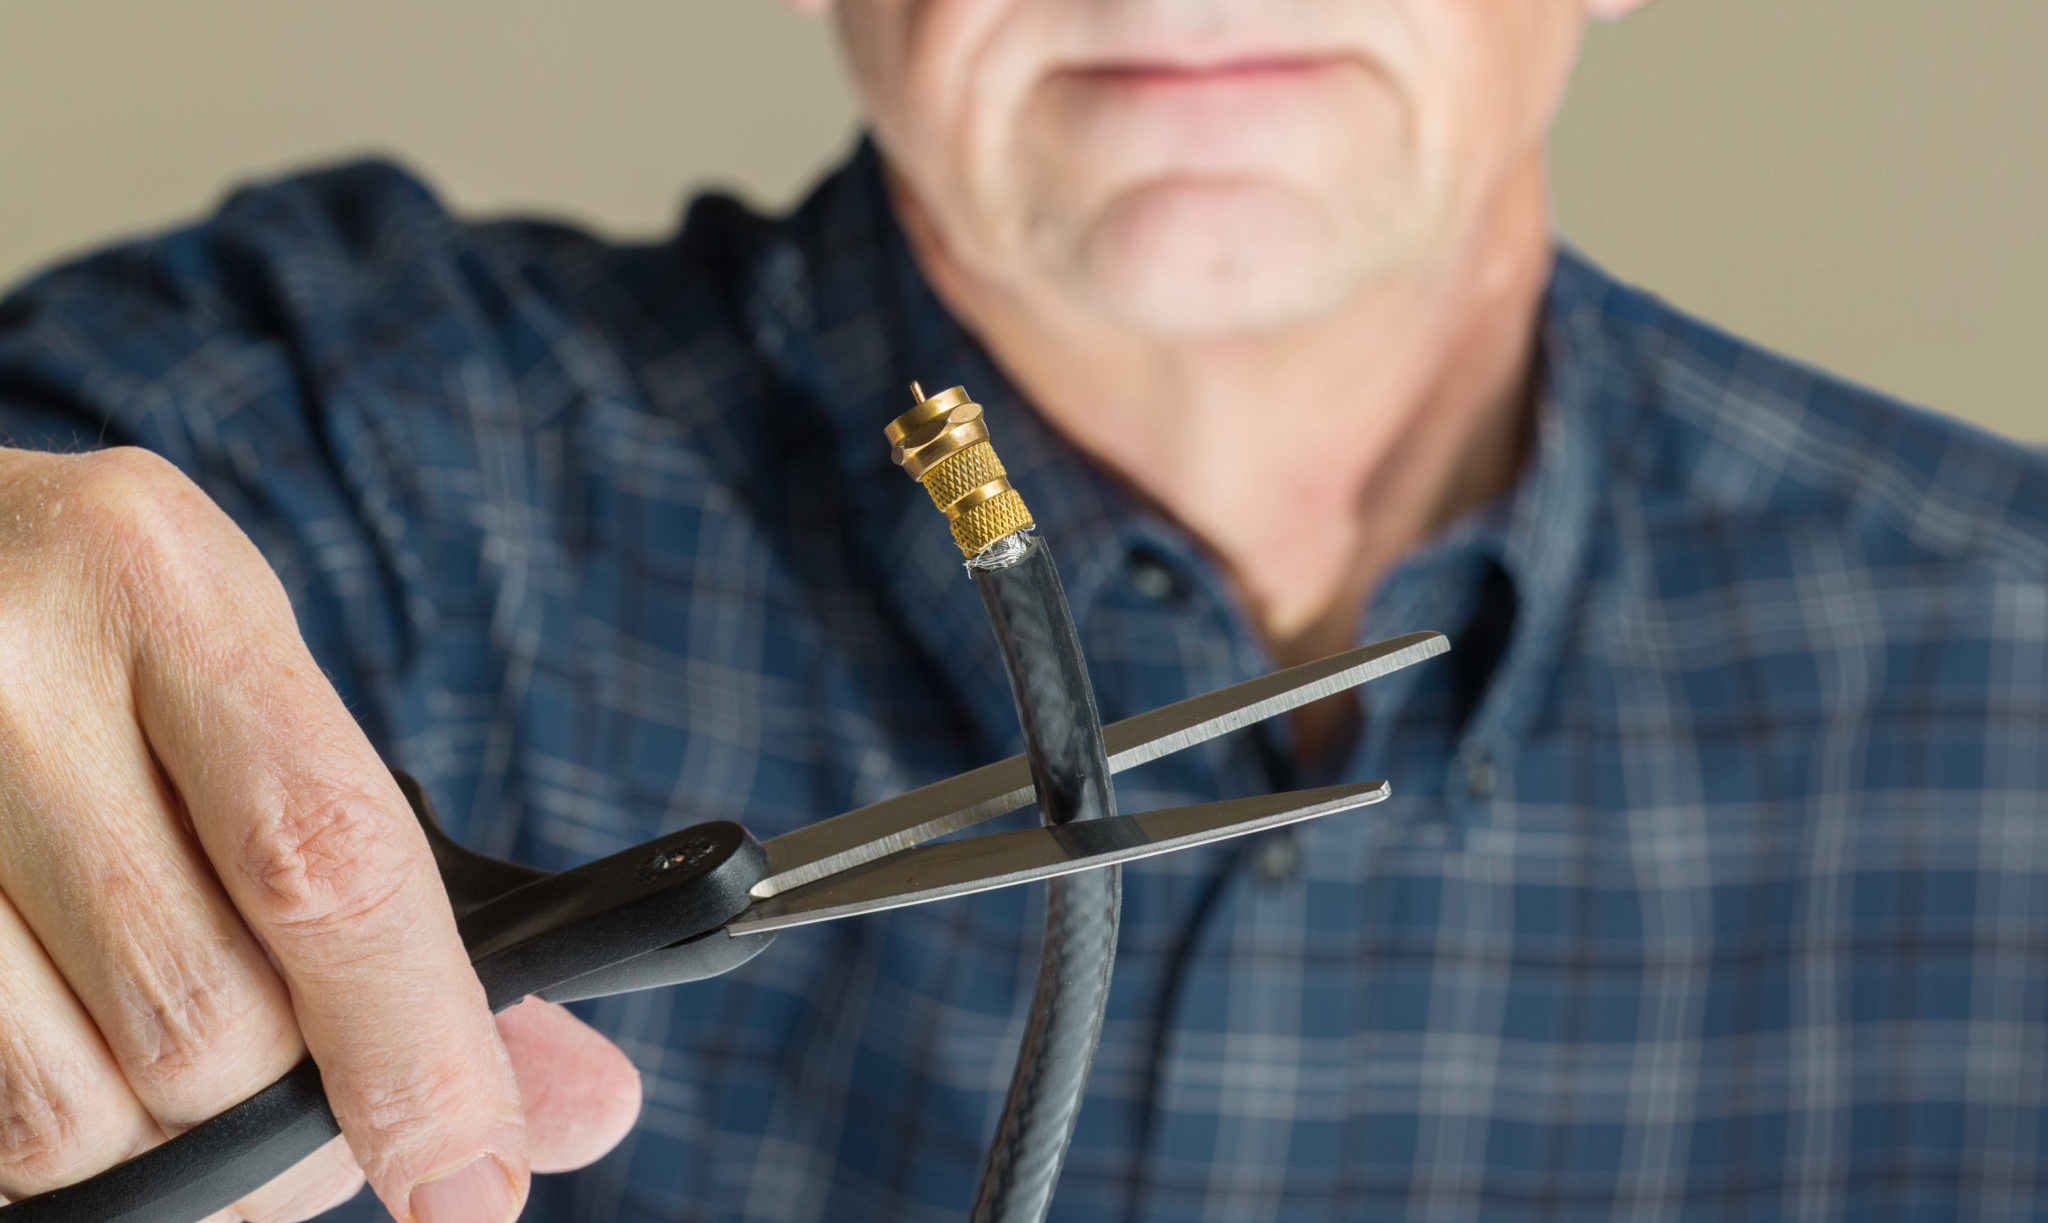 Cord Cutting is Still Going Strong But When Will Cable TV Die?